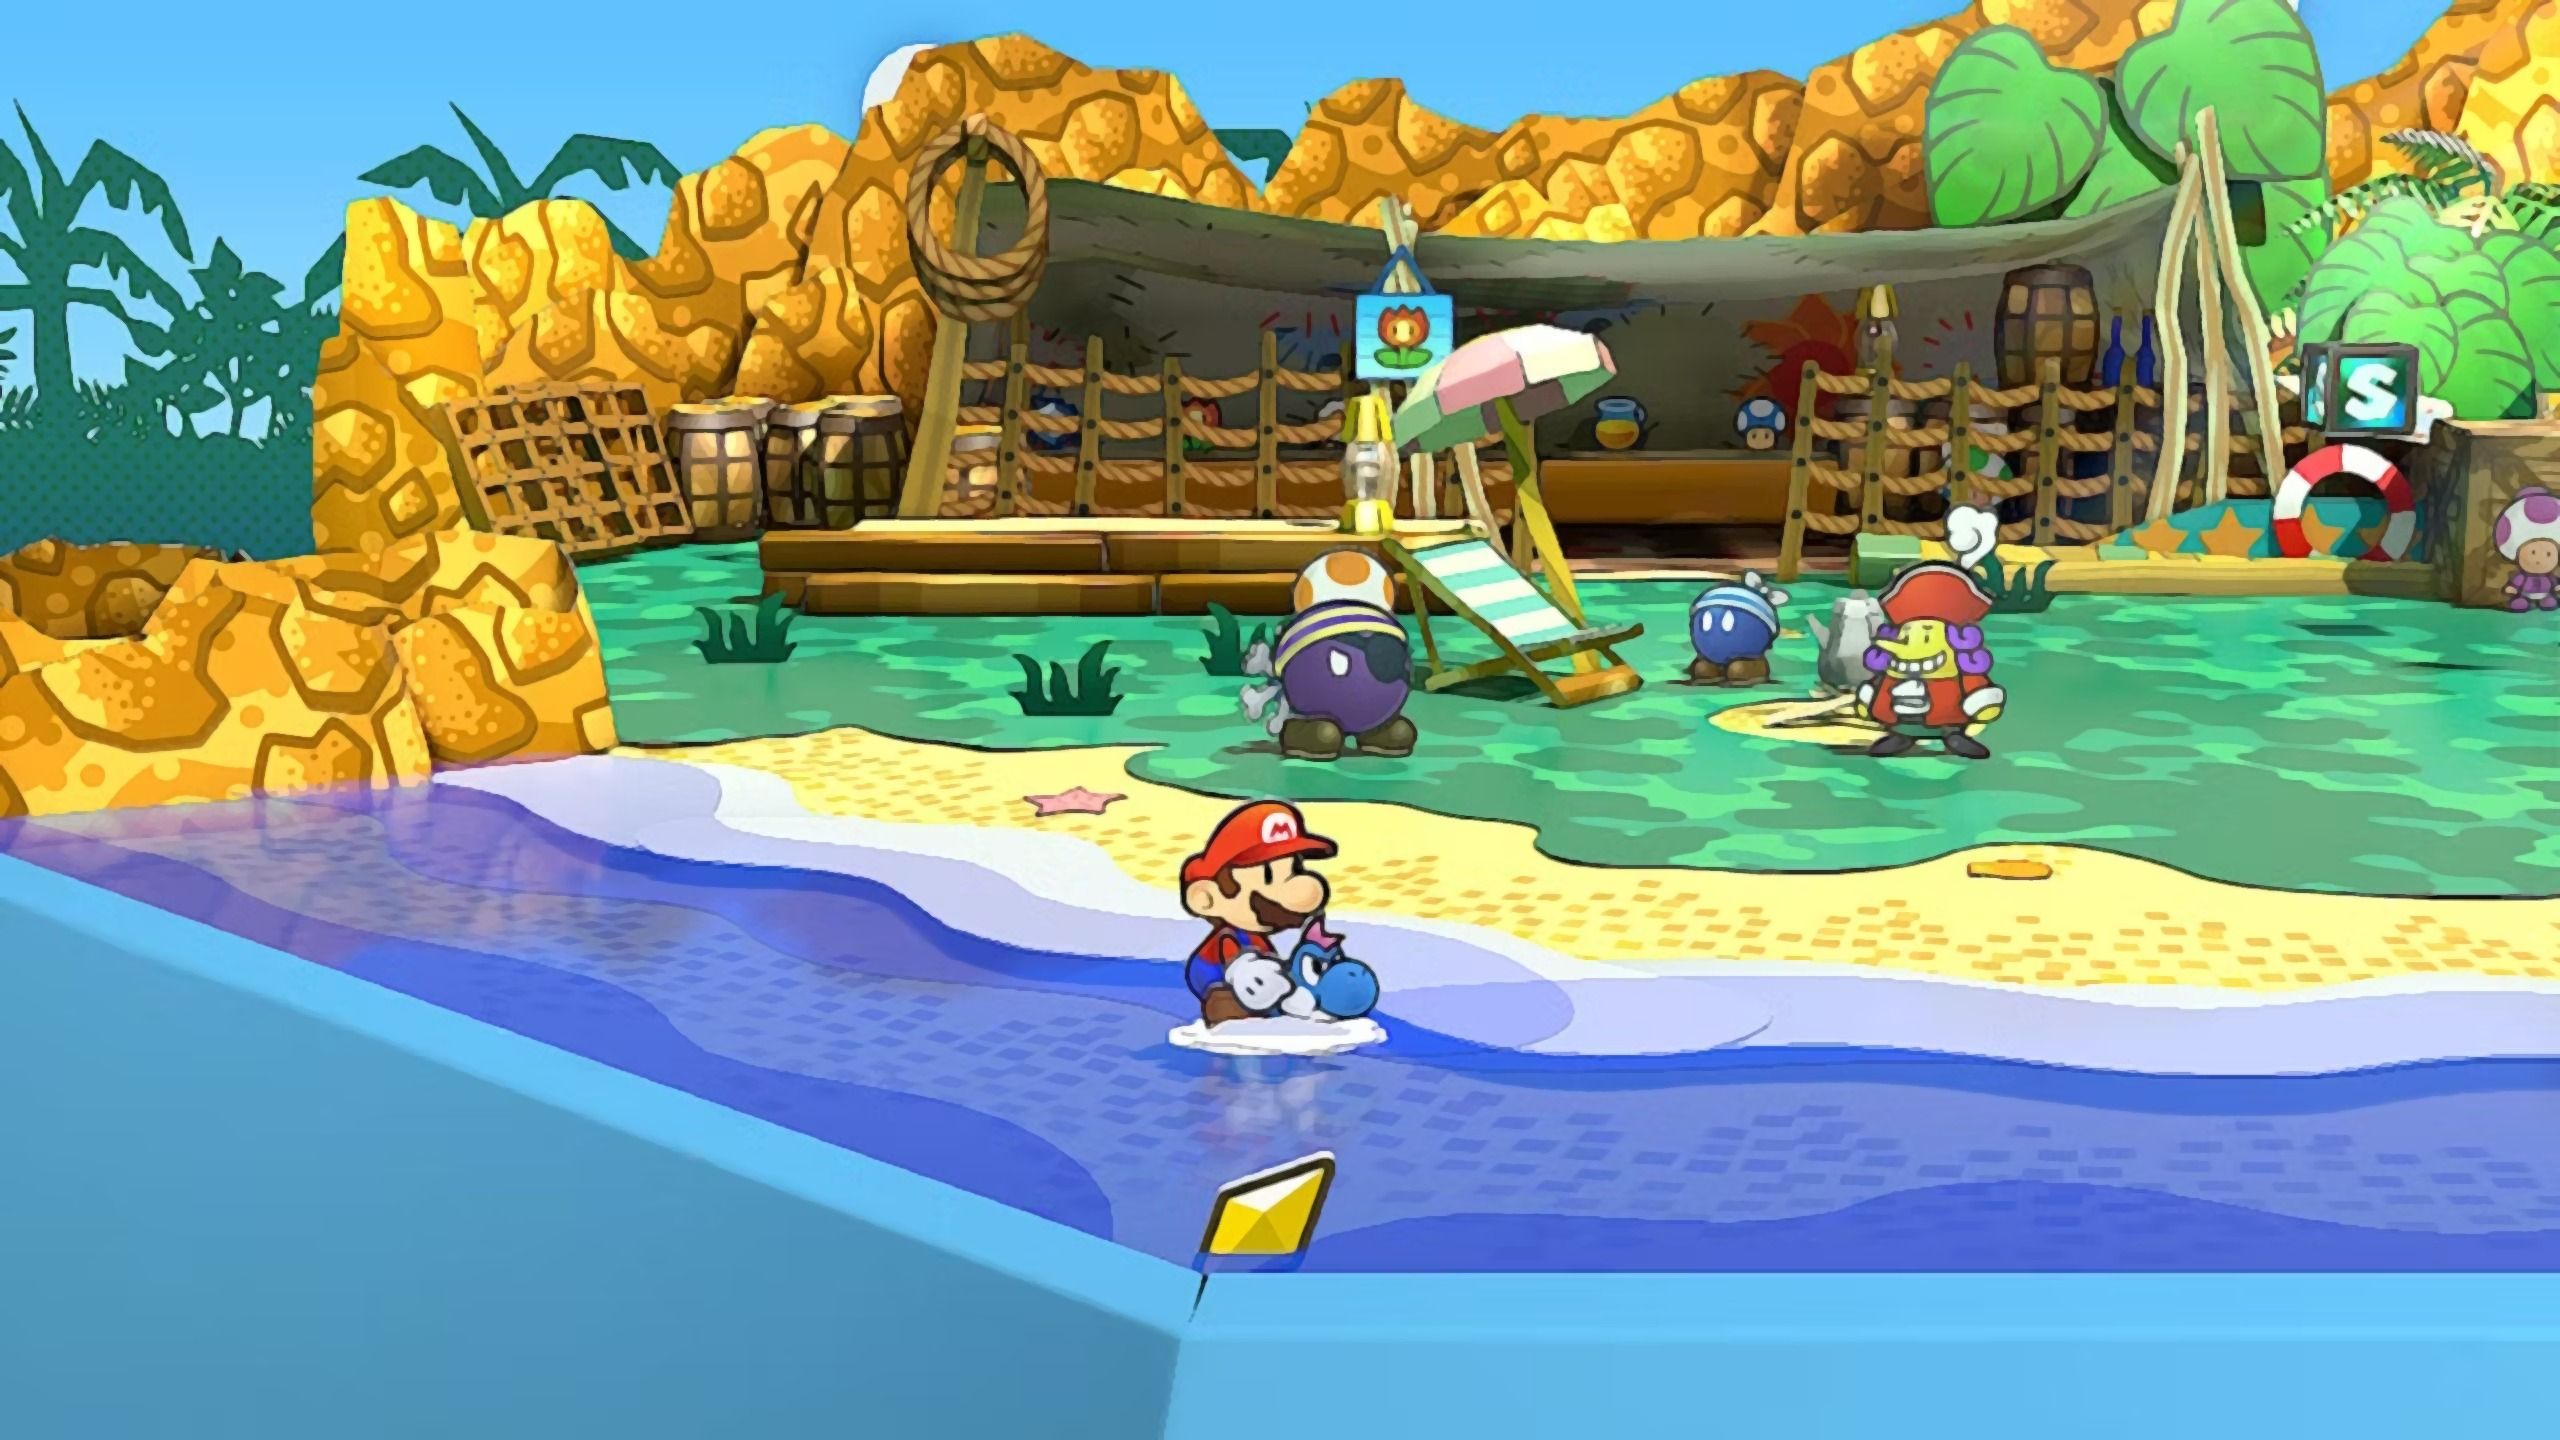 Image of the main entrance to keelhaul key in Paper Mario TTYD